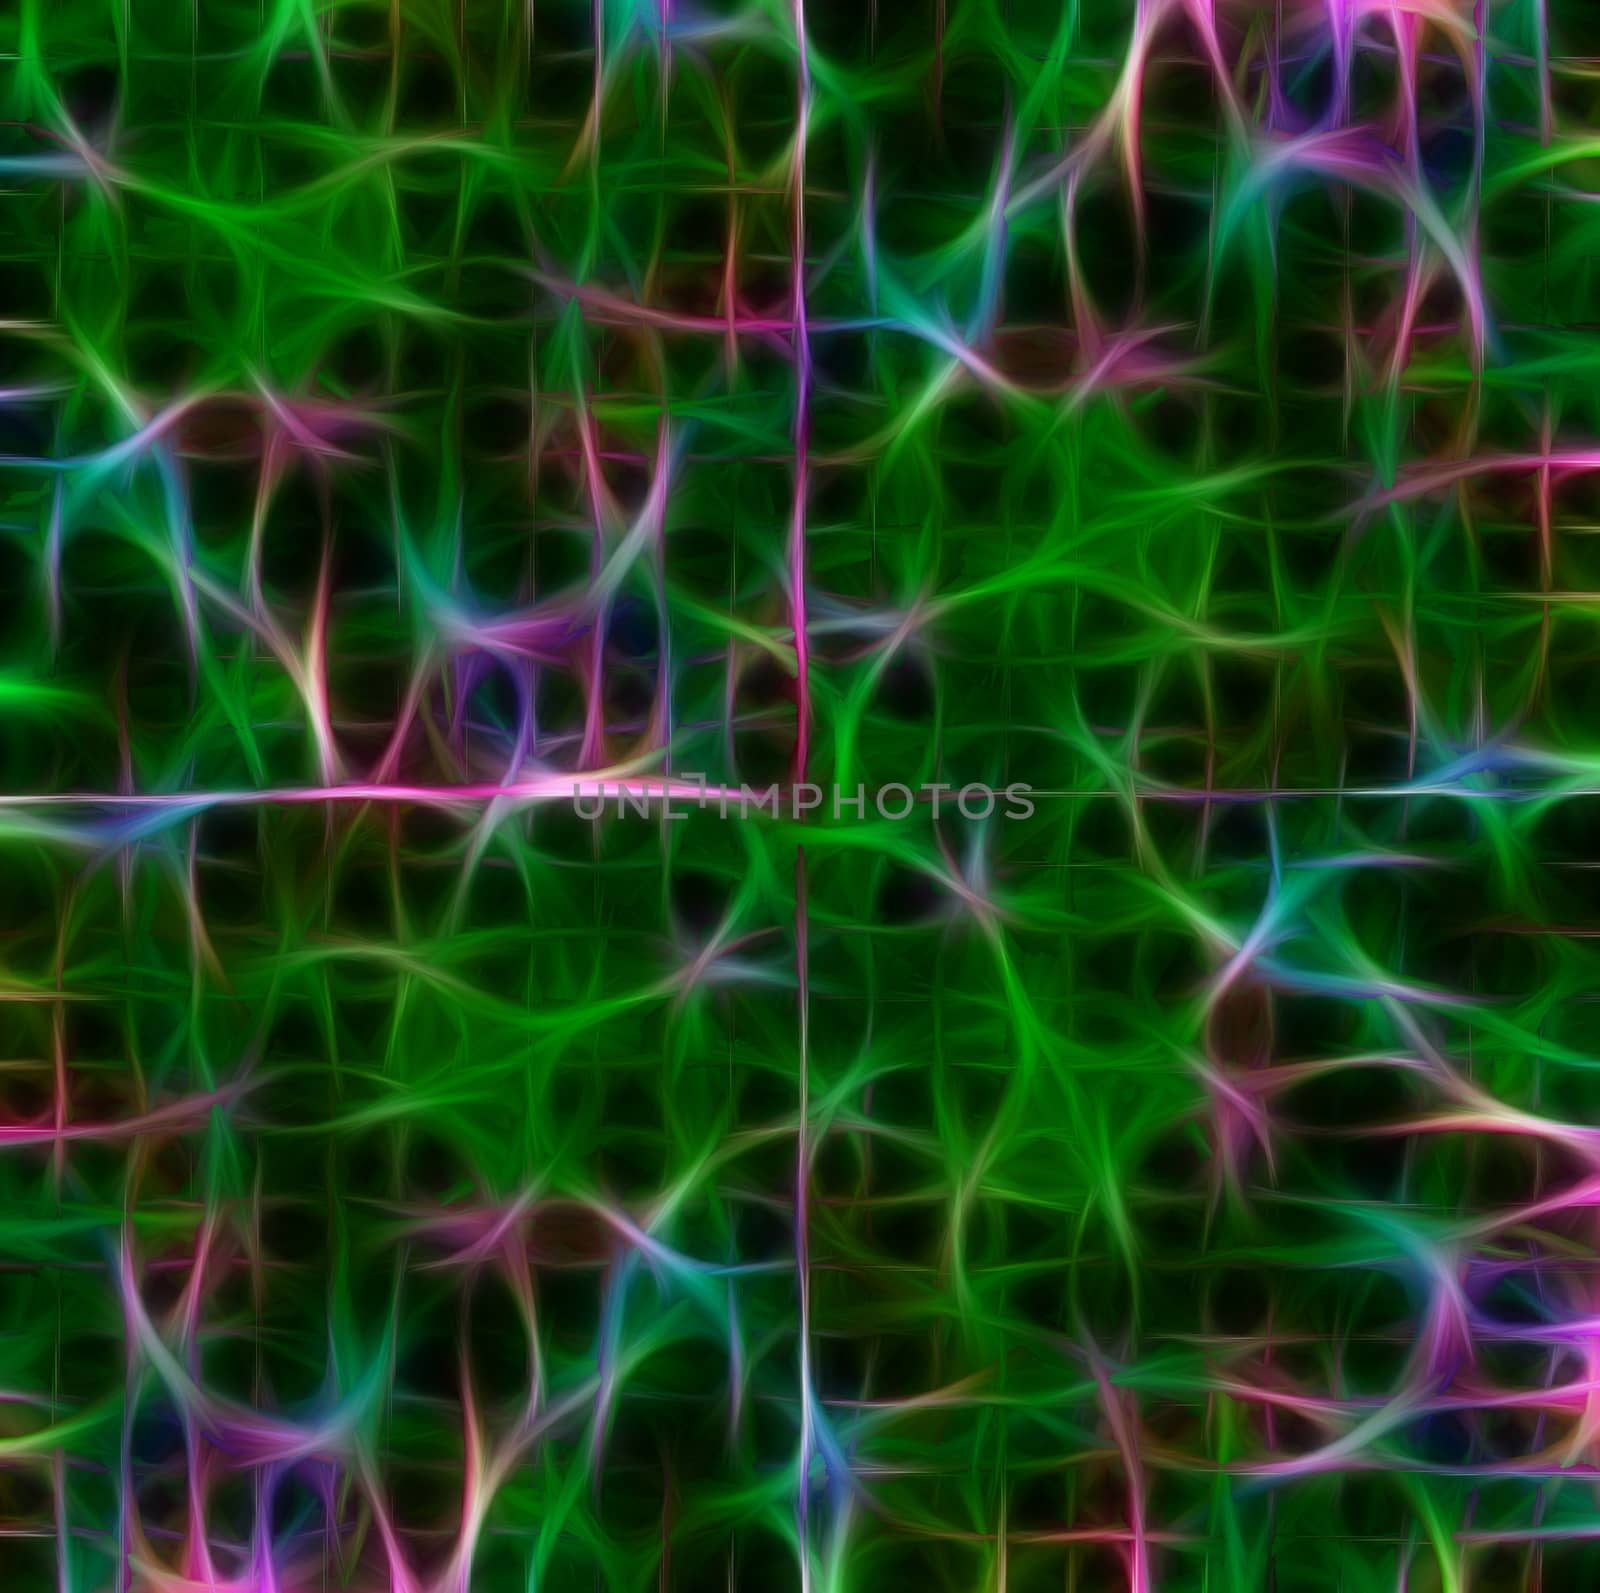 Abstract dark background of green tones, divided into four parts